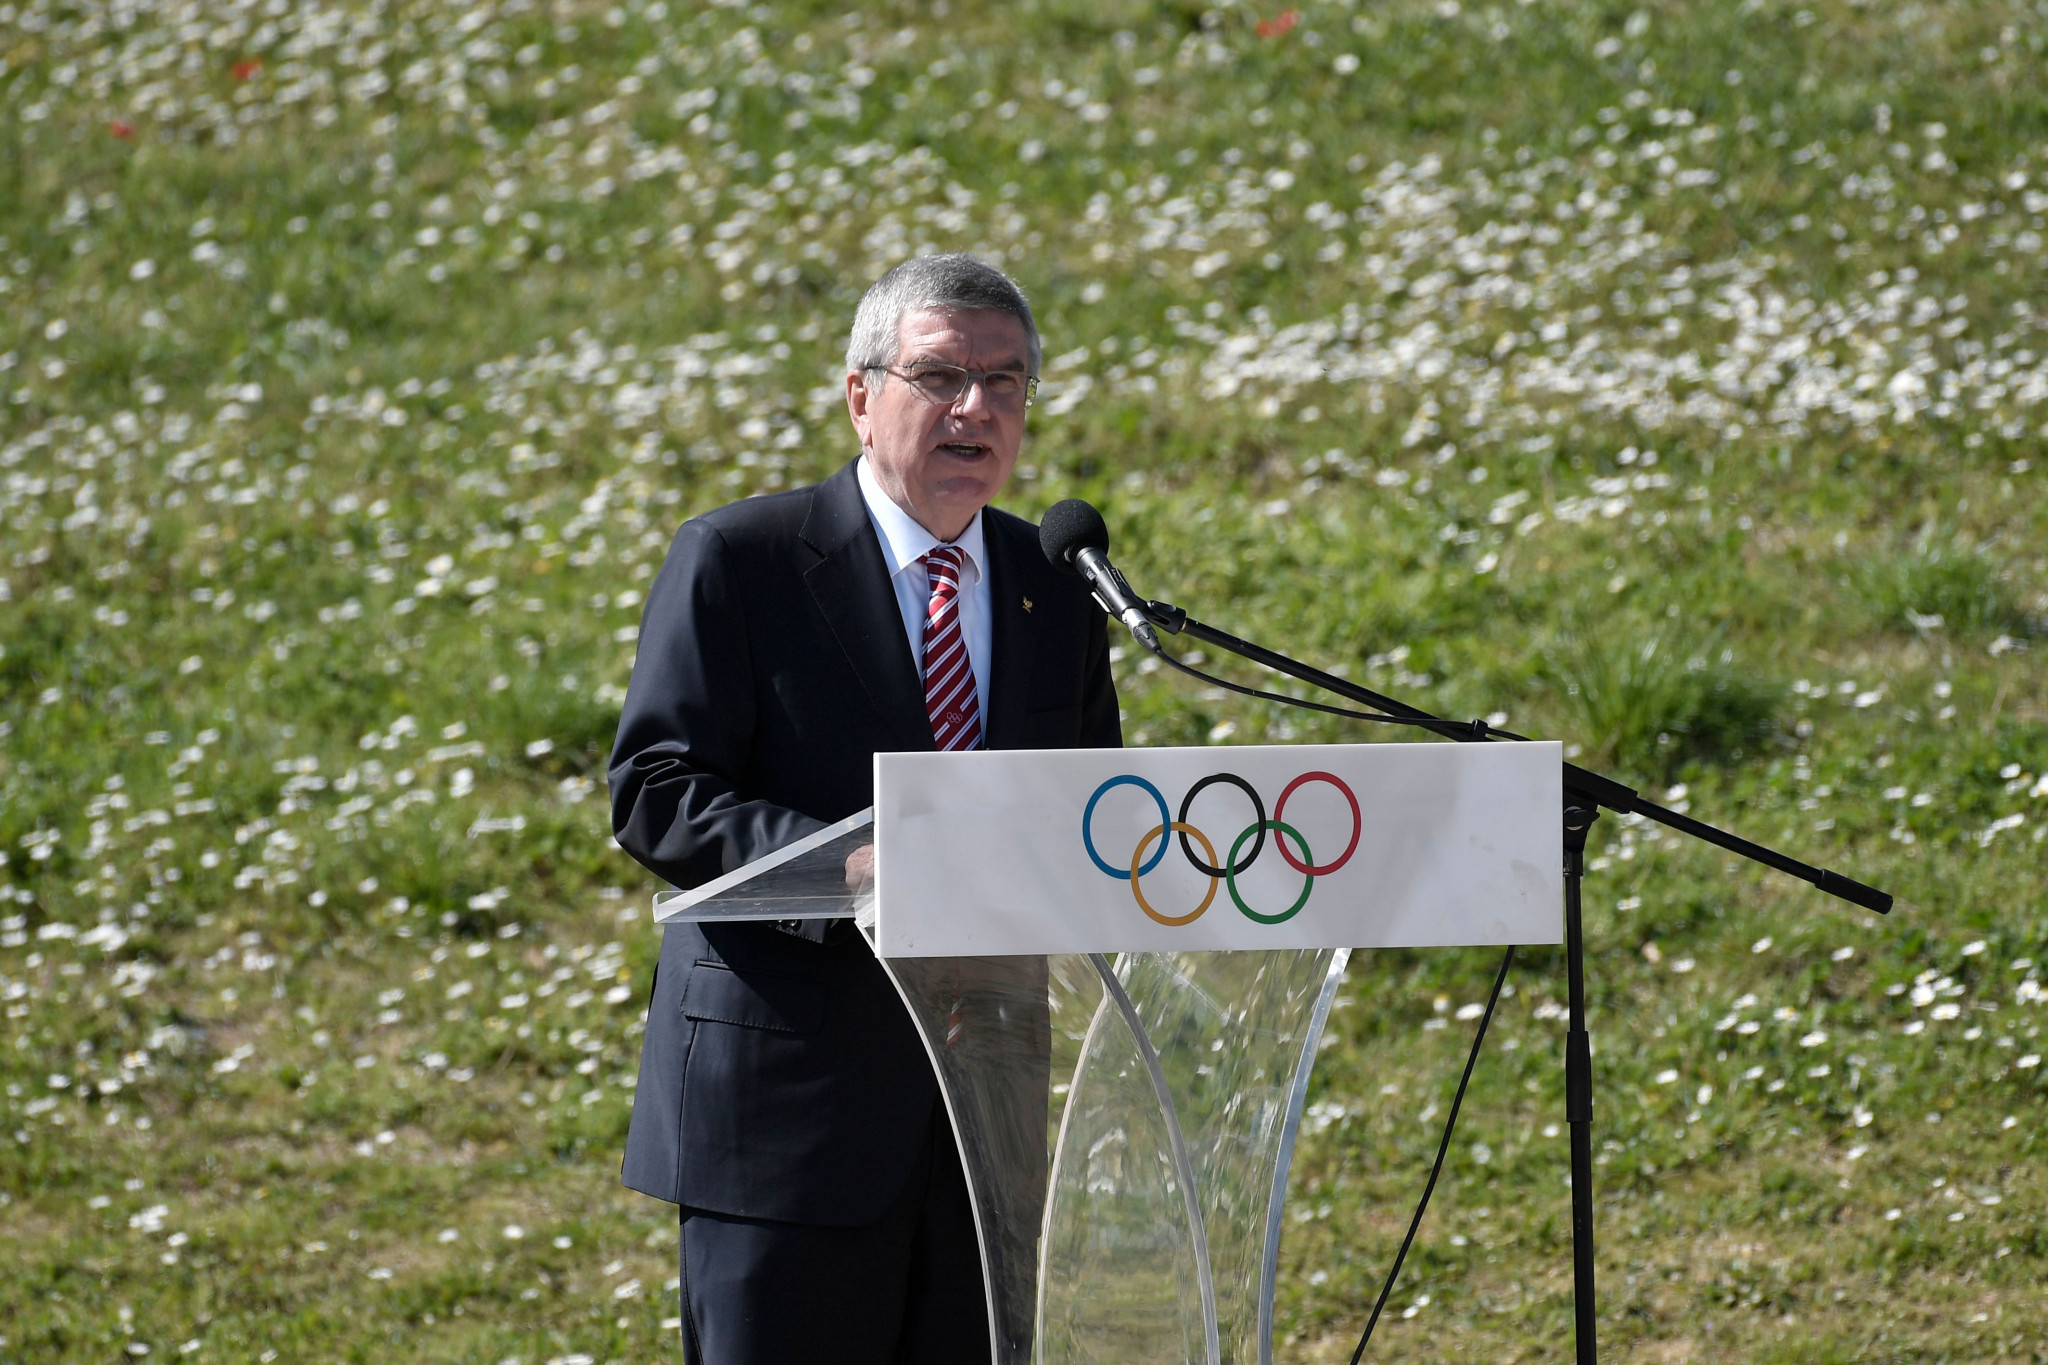 Thomas Bach has said it would have been easier to cancel Tokyo 2020 instead of postponing the Games to next year ©Getty Images